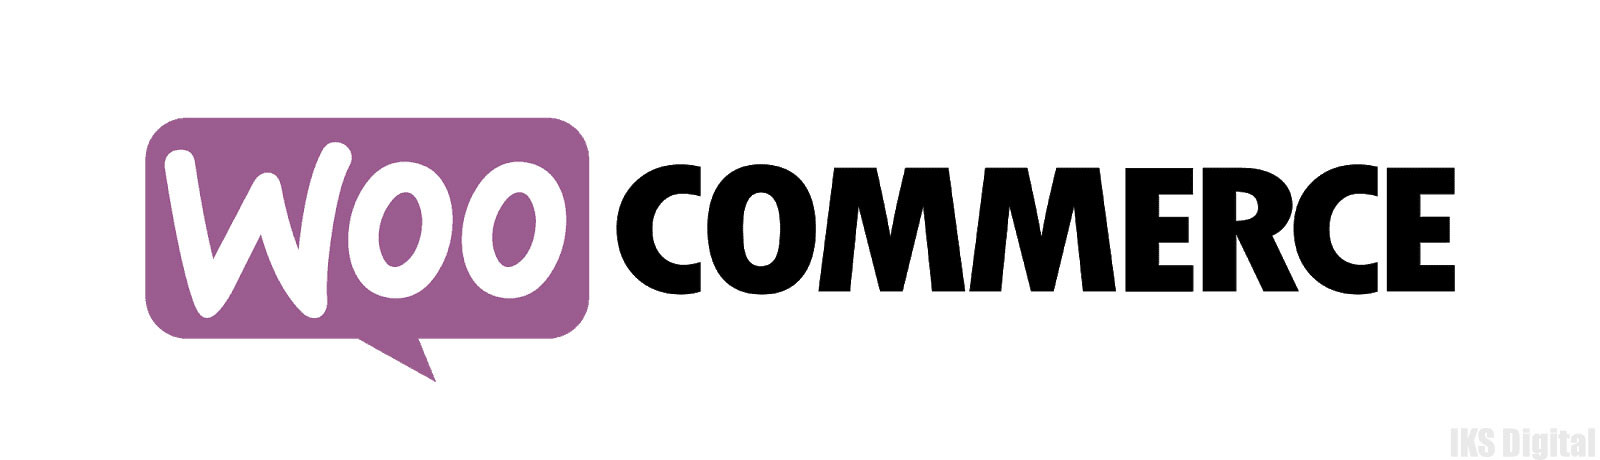 WooCommerce is top Open Source Ecommerce Platforms for 2021